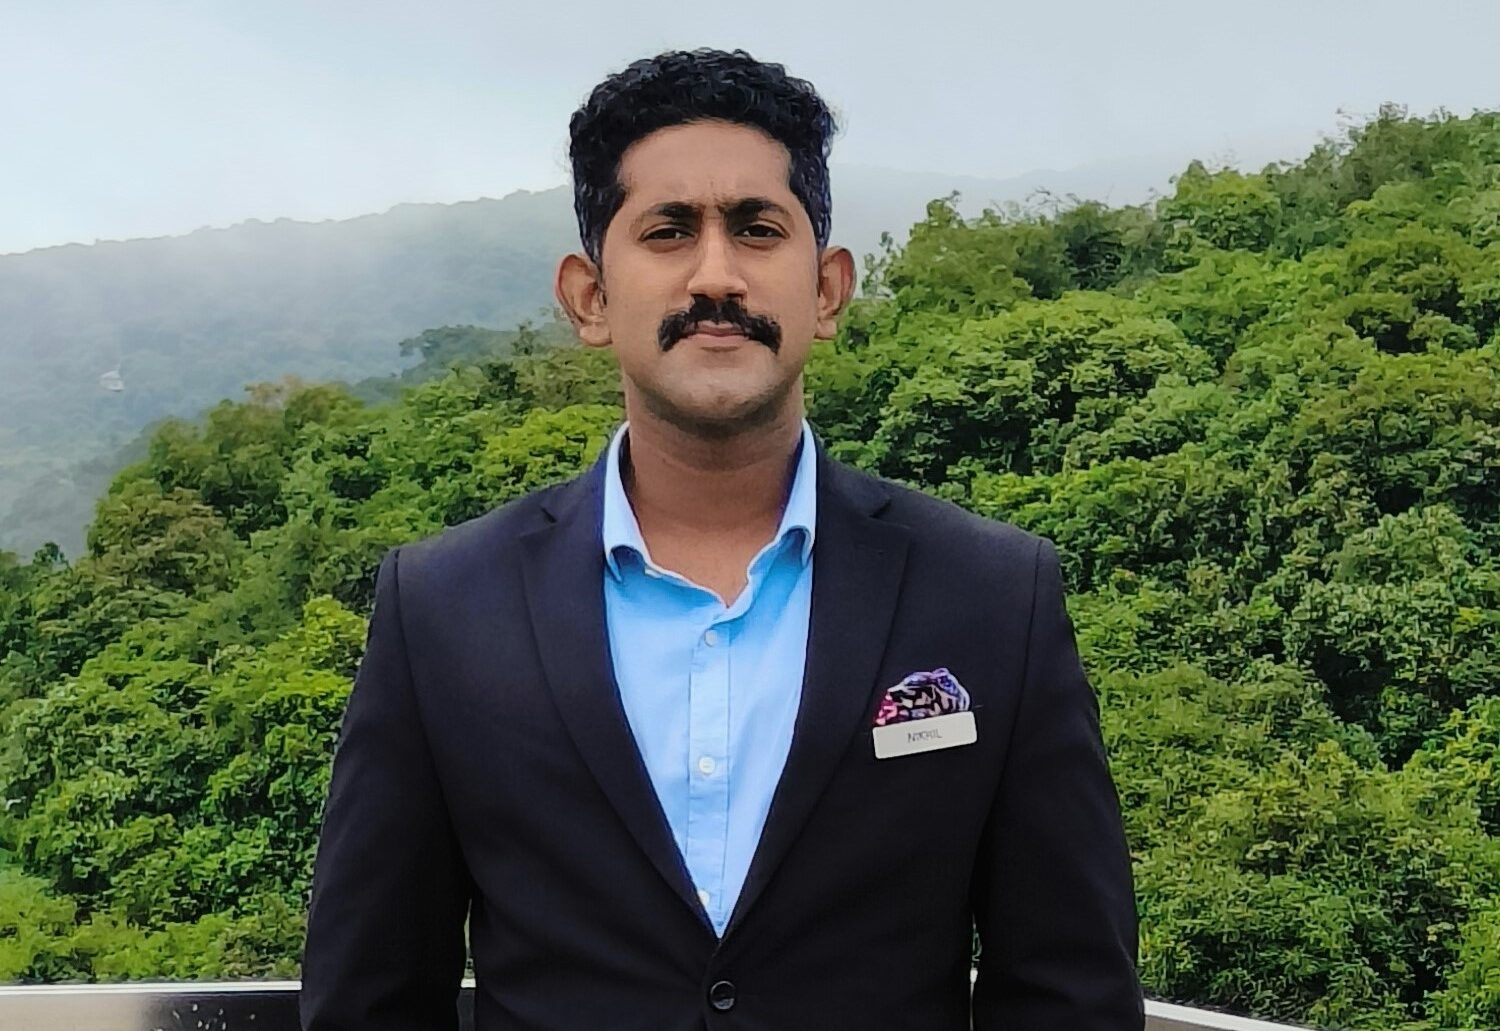 Courtyard by Marriott Mahabaleshwar appoints Nikhil Jacob as the New Food and Beverage Manager